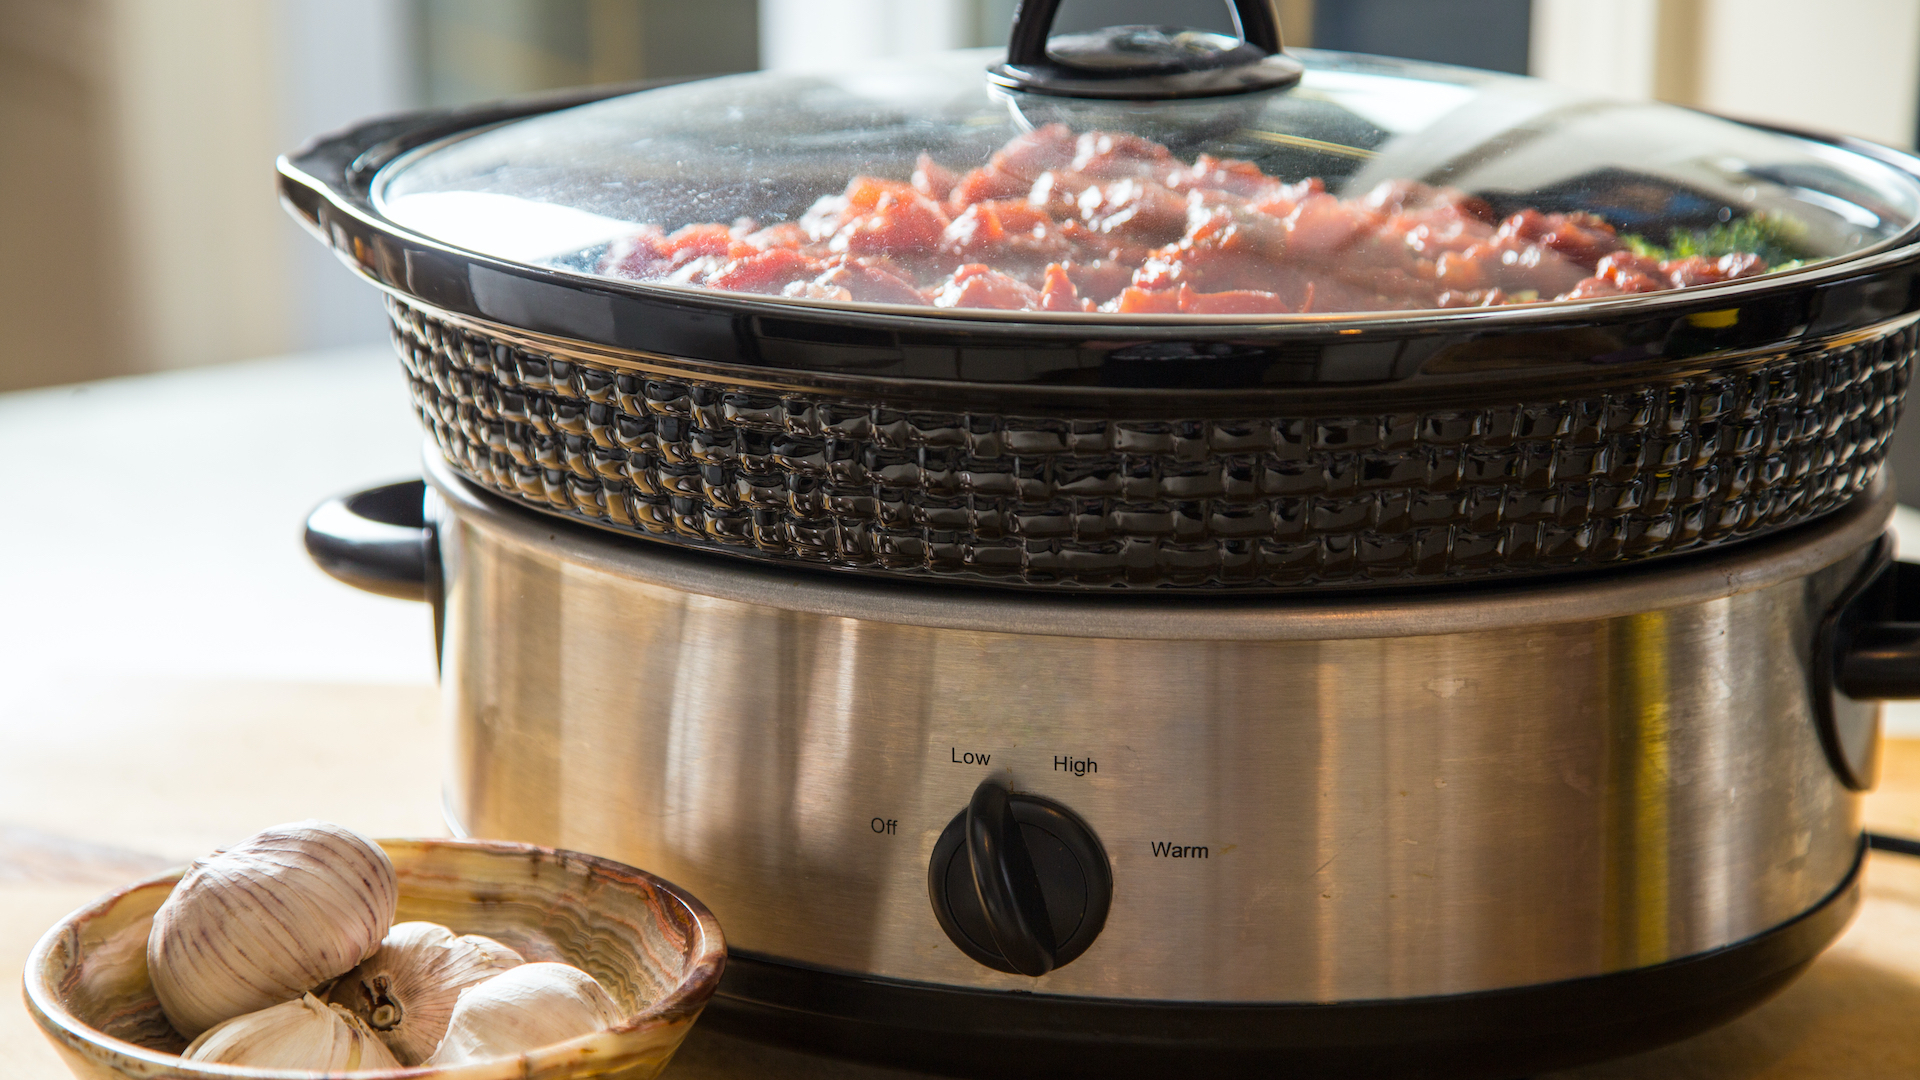 The Easiest Way to Clean a Slow Cooker [Video]